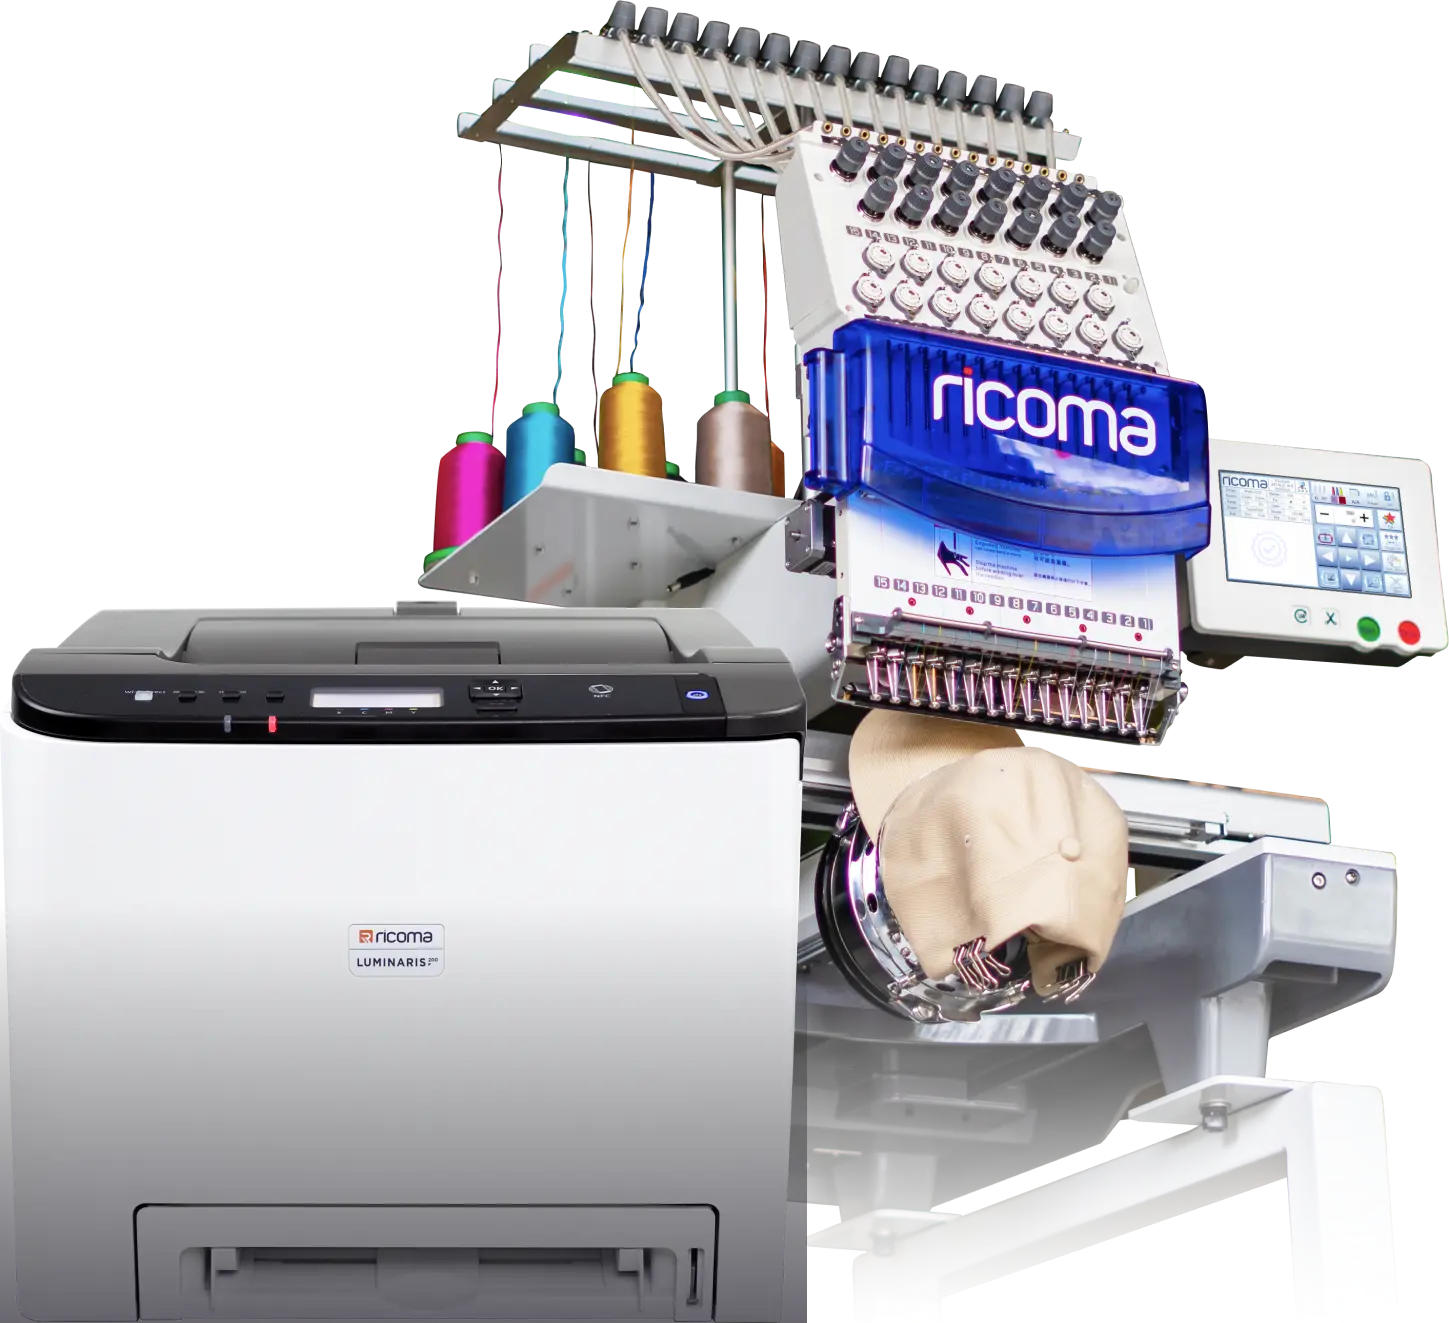 Ricoma 10 Needle Embroidery Machine Complete Package